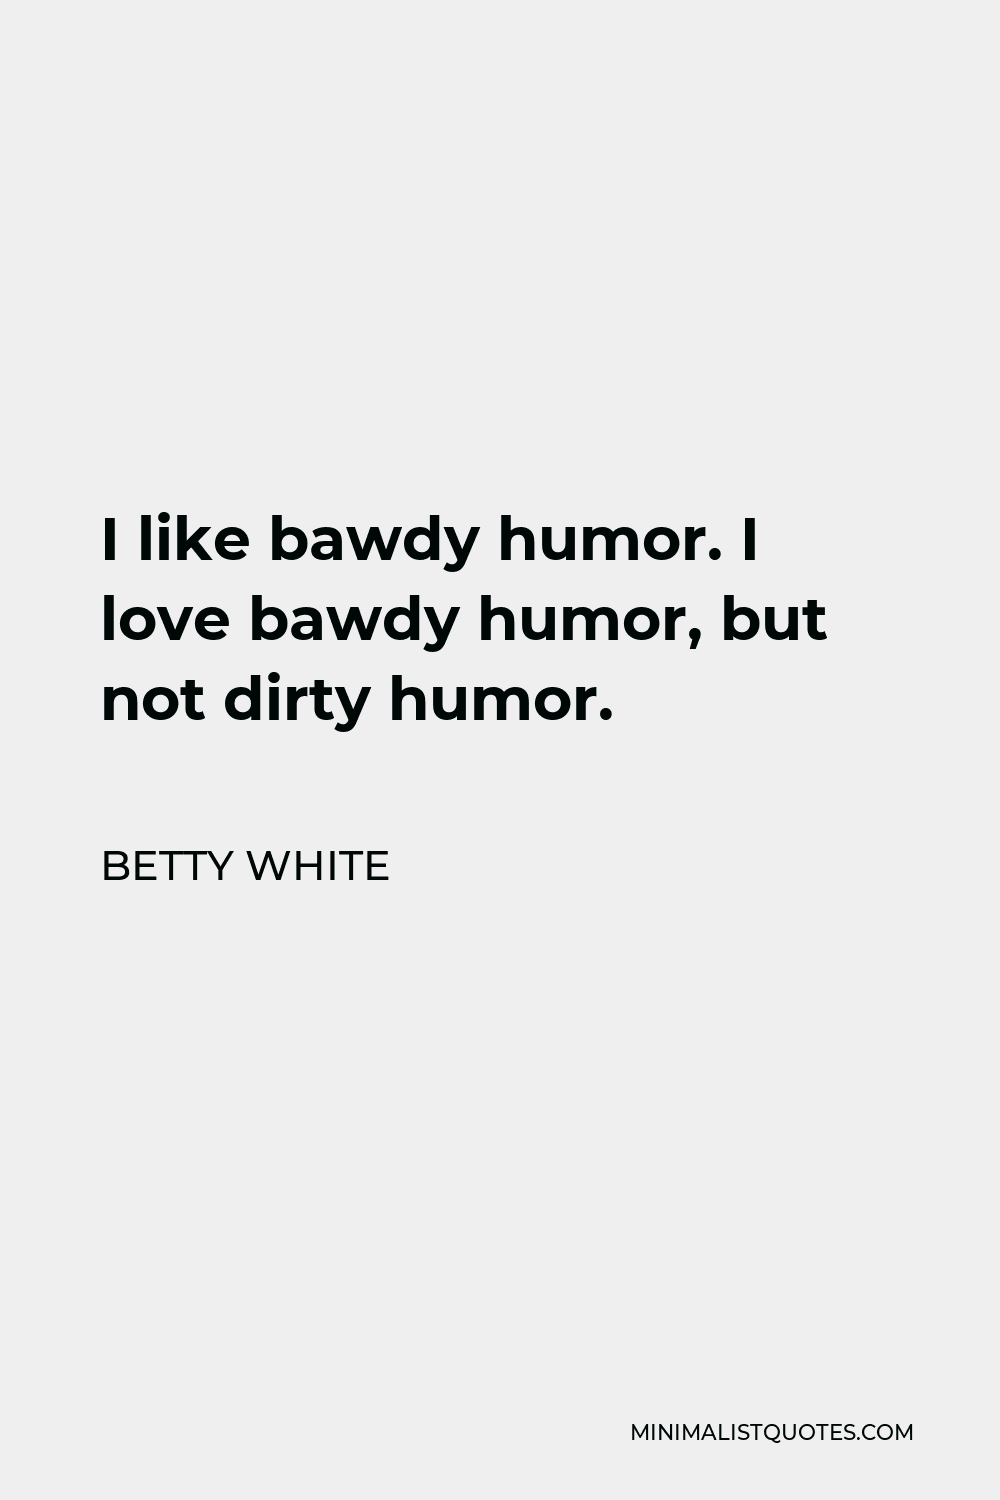 Betty White Quote - I like bawdy humor. I love bawdy humor, but not dirty humor.